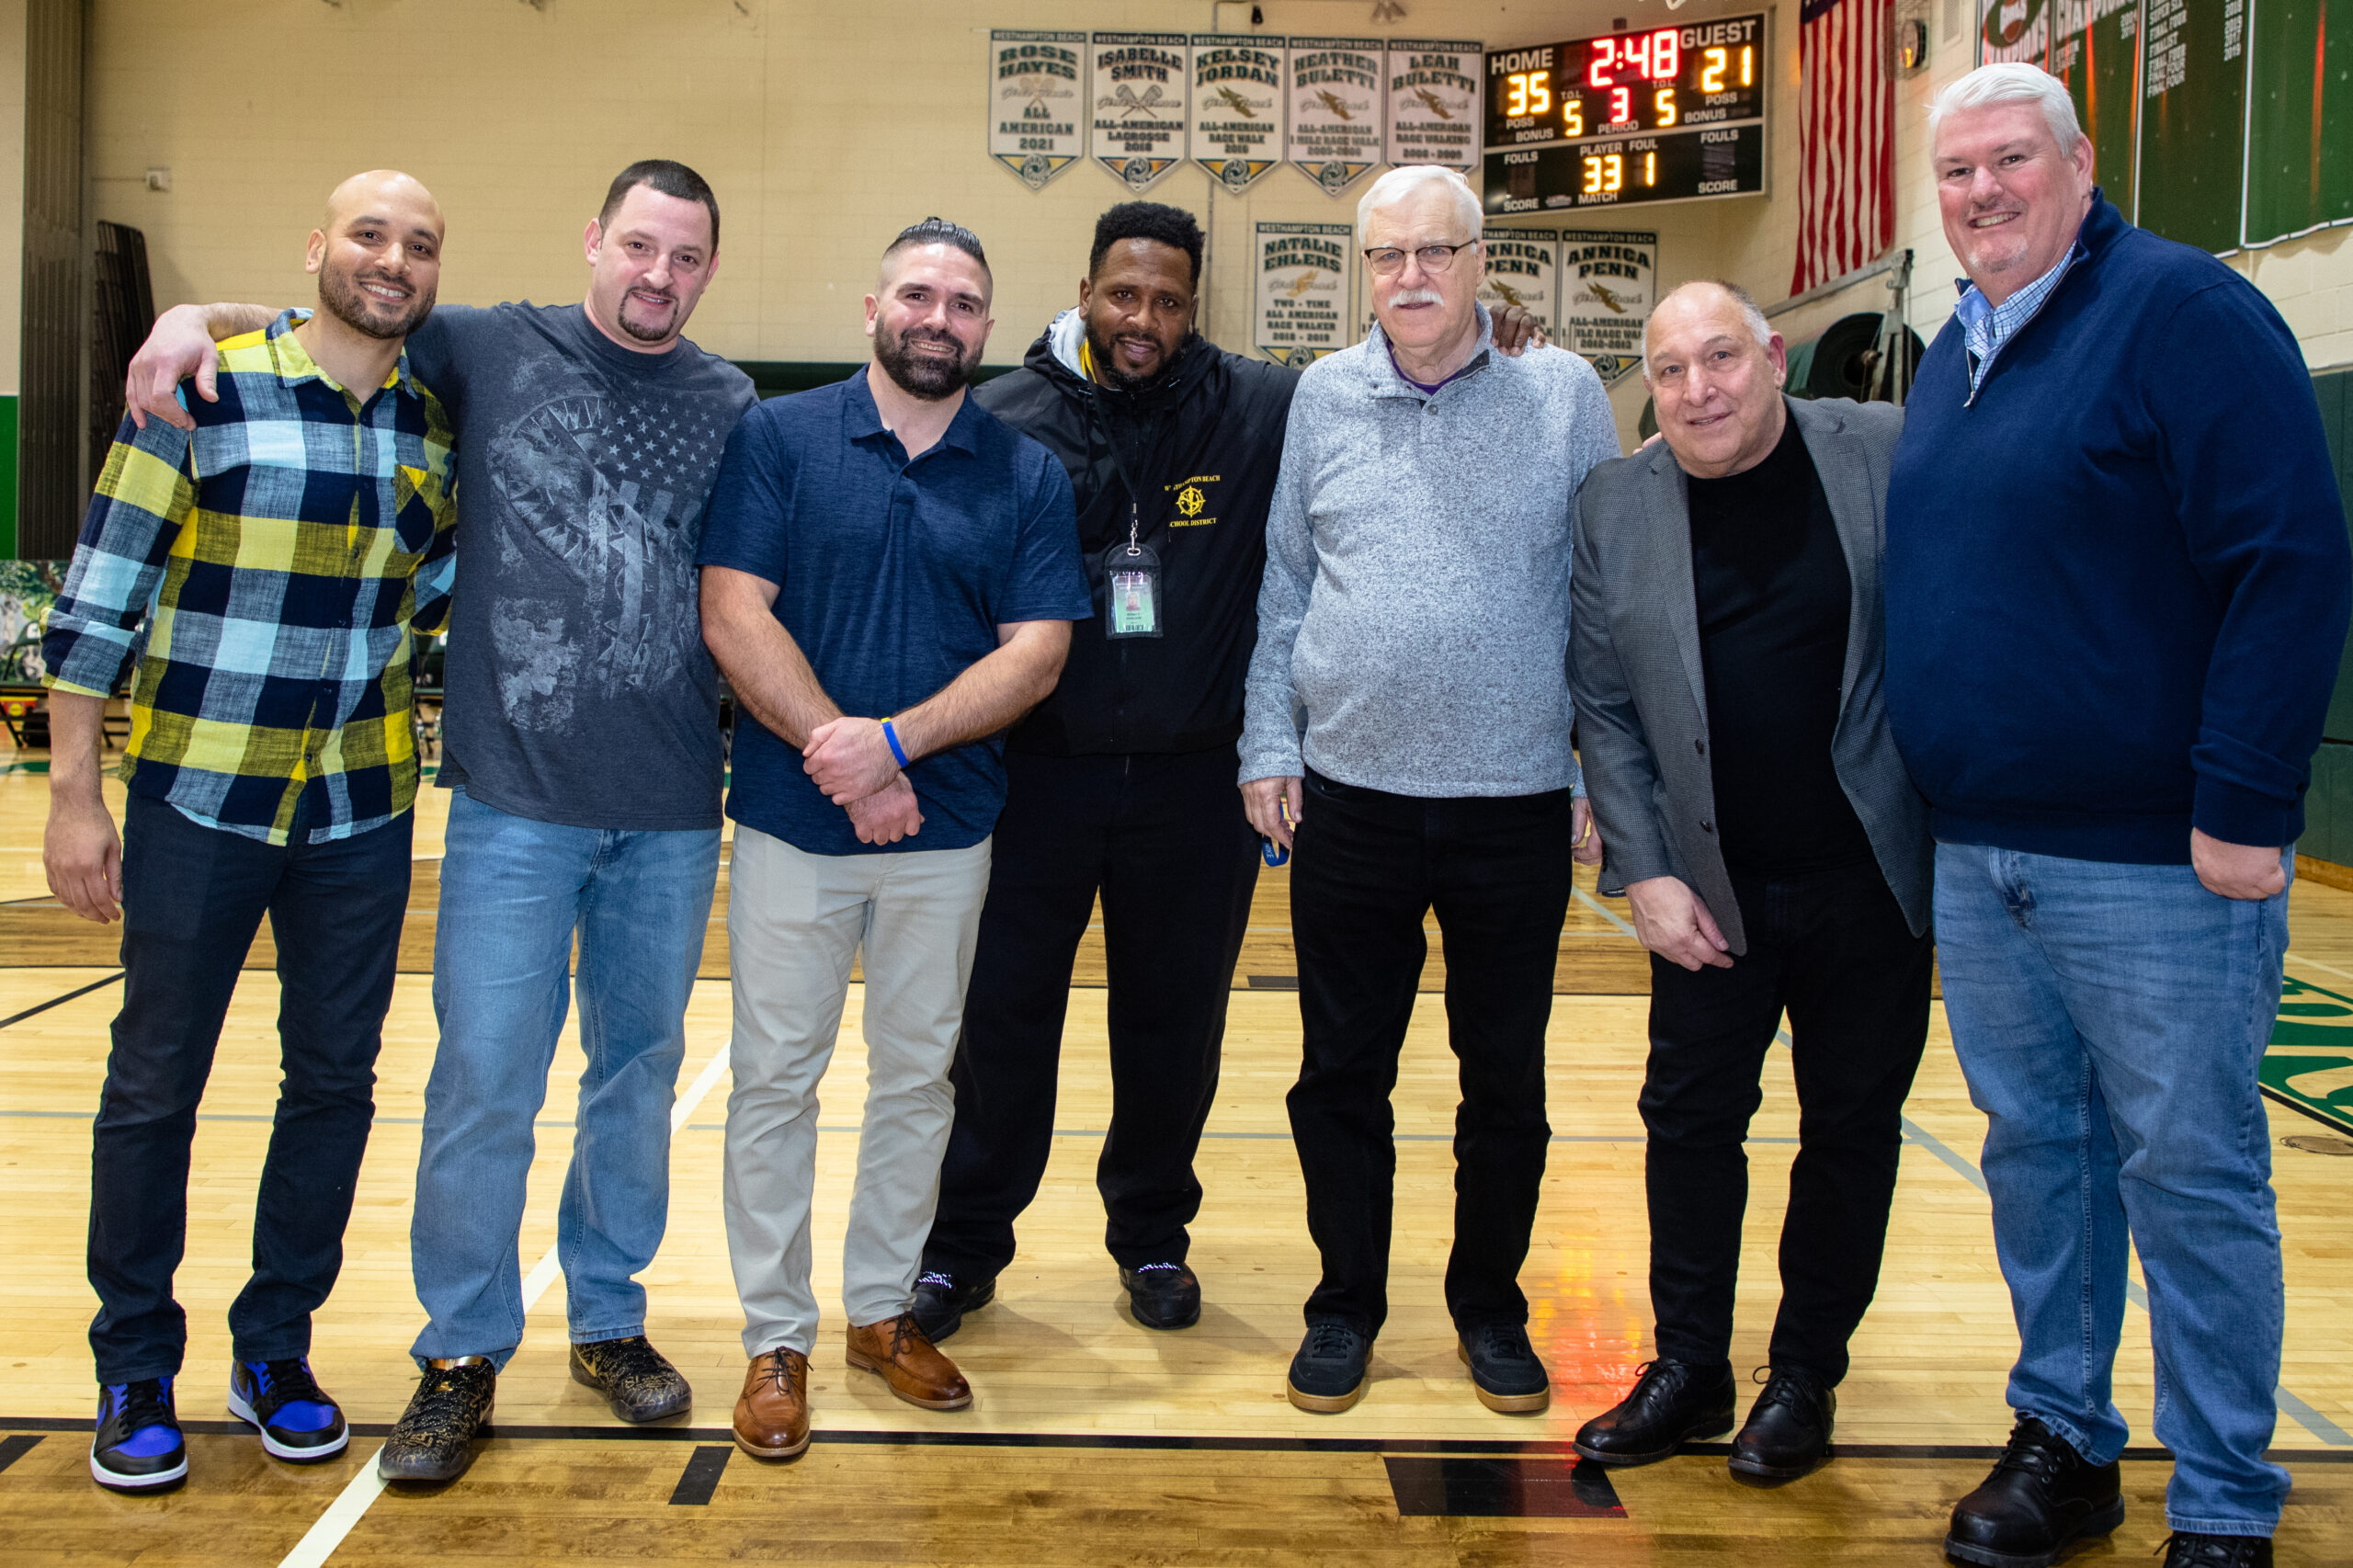 Players and coaches who were in attendance for last week's 25th anniversary were, from left, Bronson Martin, Adam Kandell, Dale Menendez, Ron Gholson, Rich Wrase, Jack Vivonetto and Bill Hempfling.   MICHAEL O'CONNOR